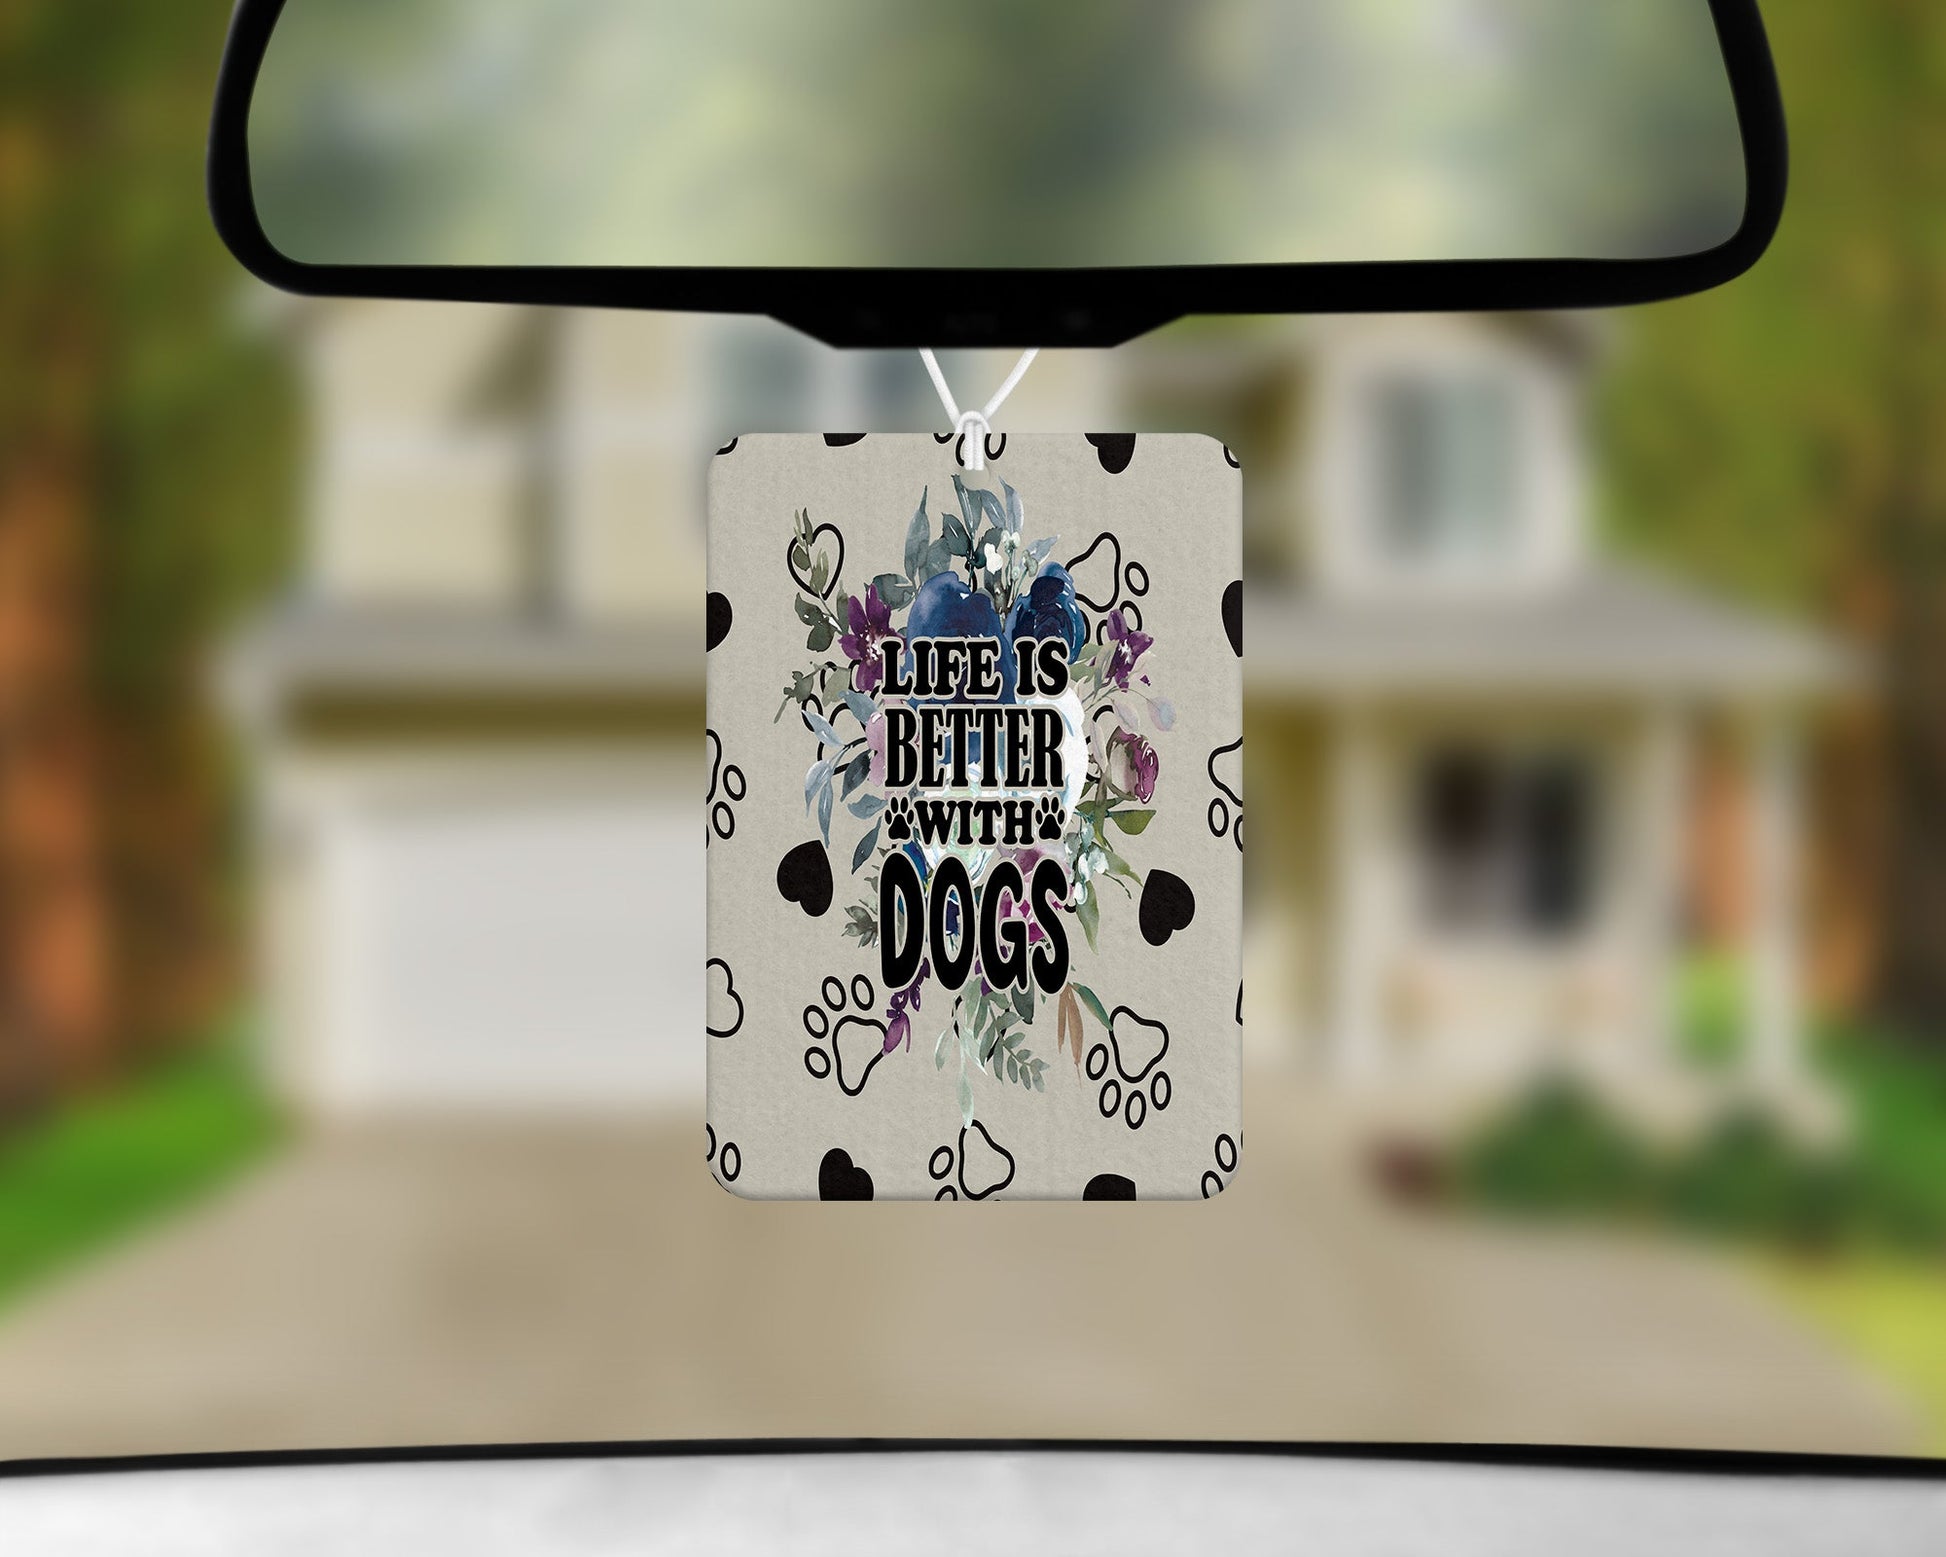 Life IS Better With Dogs|Freshie|Includes Scent Bottle - Vehicle Air Freshener